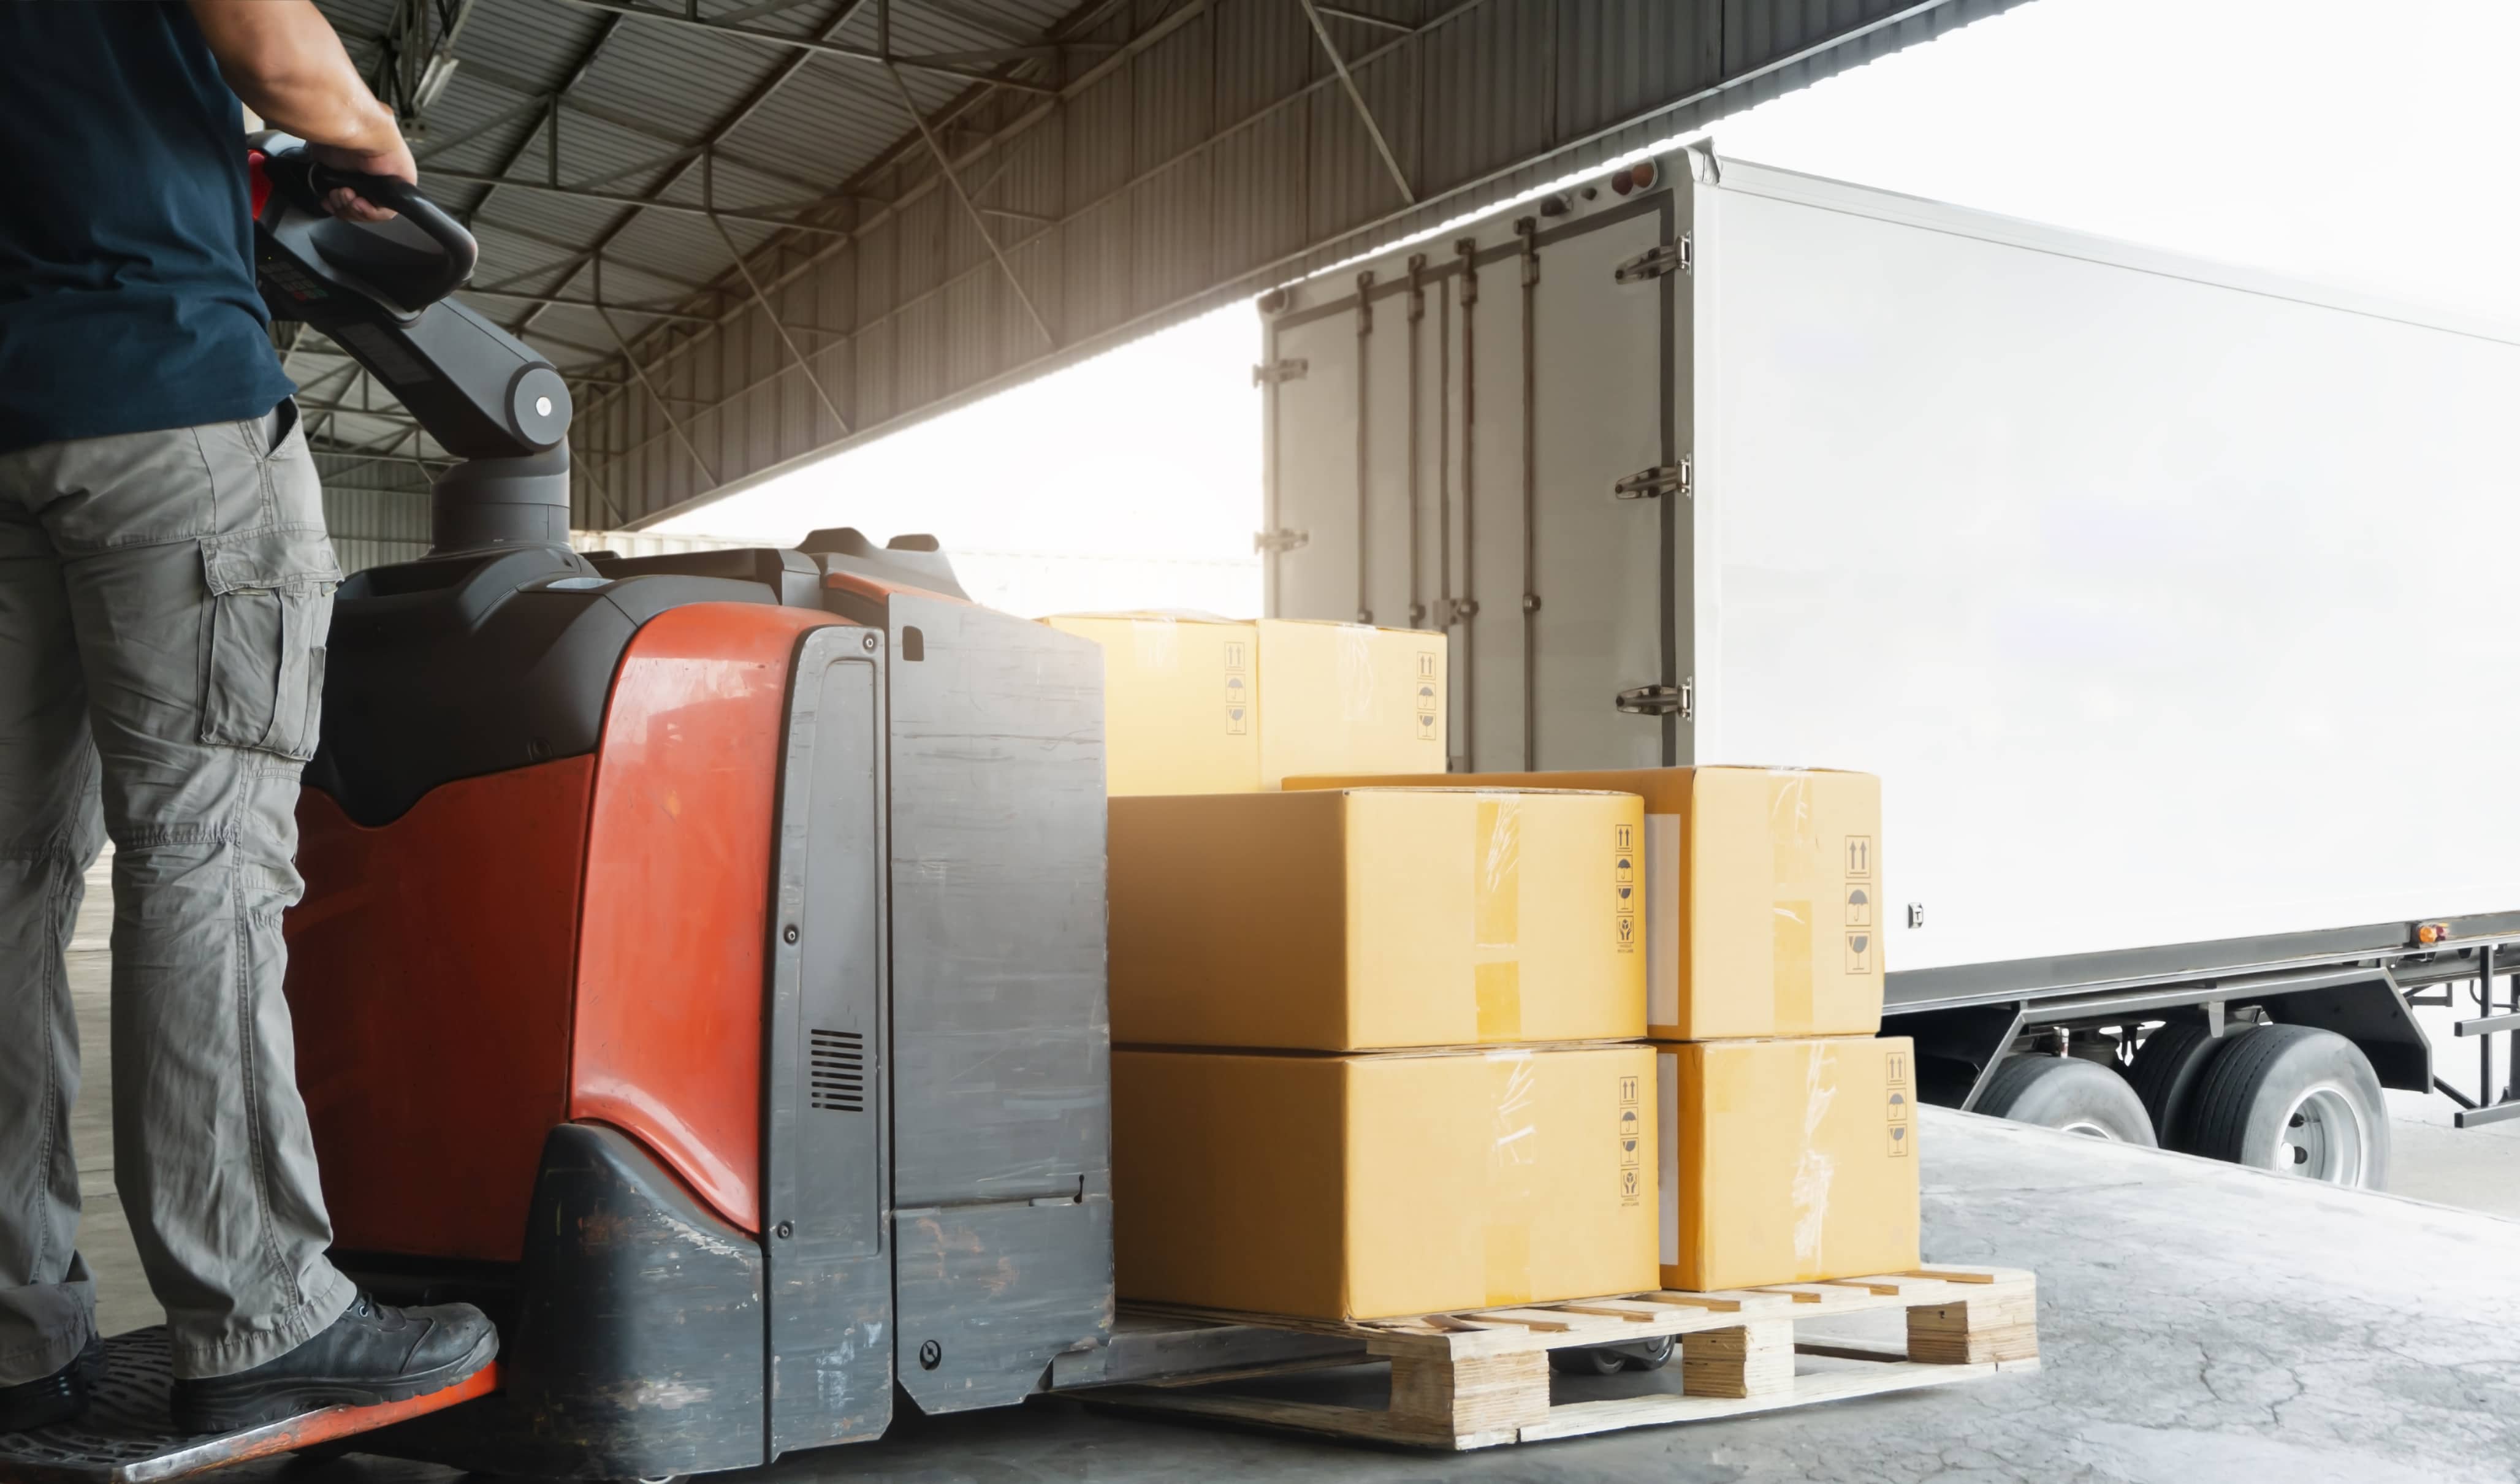 Forklift driver unloading shipment boxes into a truck, Road freight transport, Warehouse industrial delivery shipment goods, Logistics and transportation.